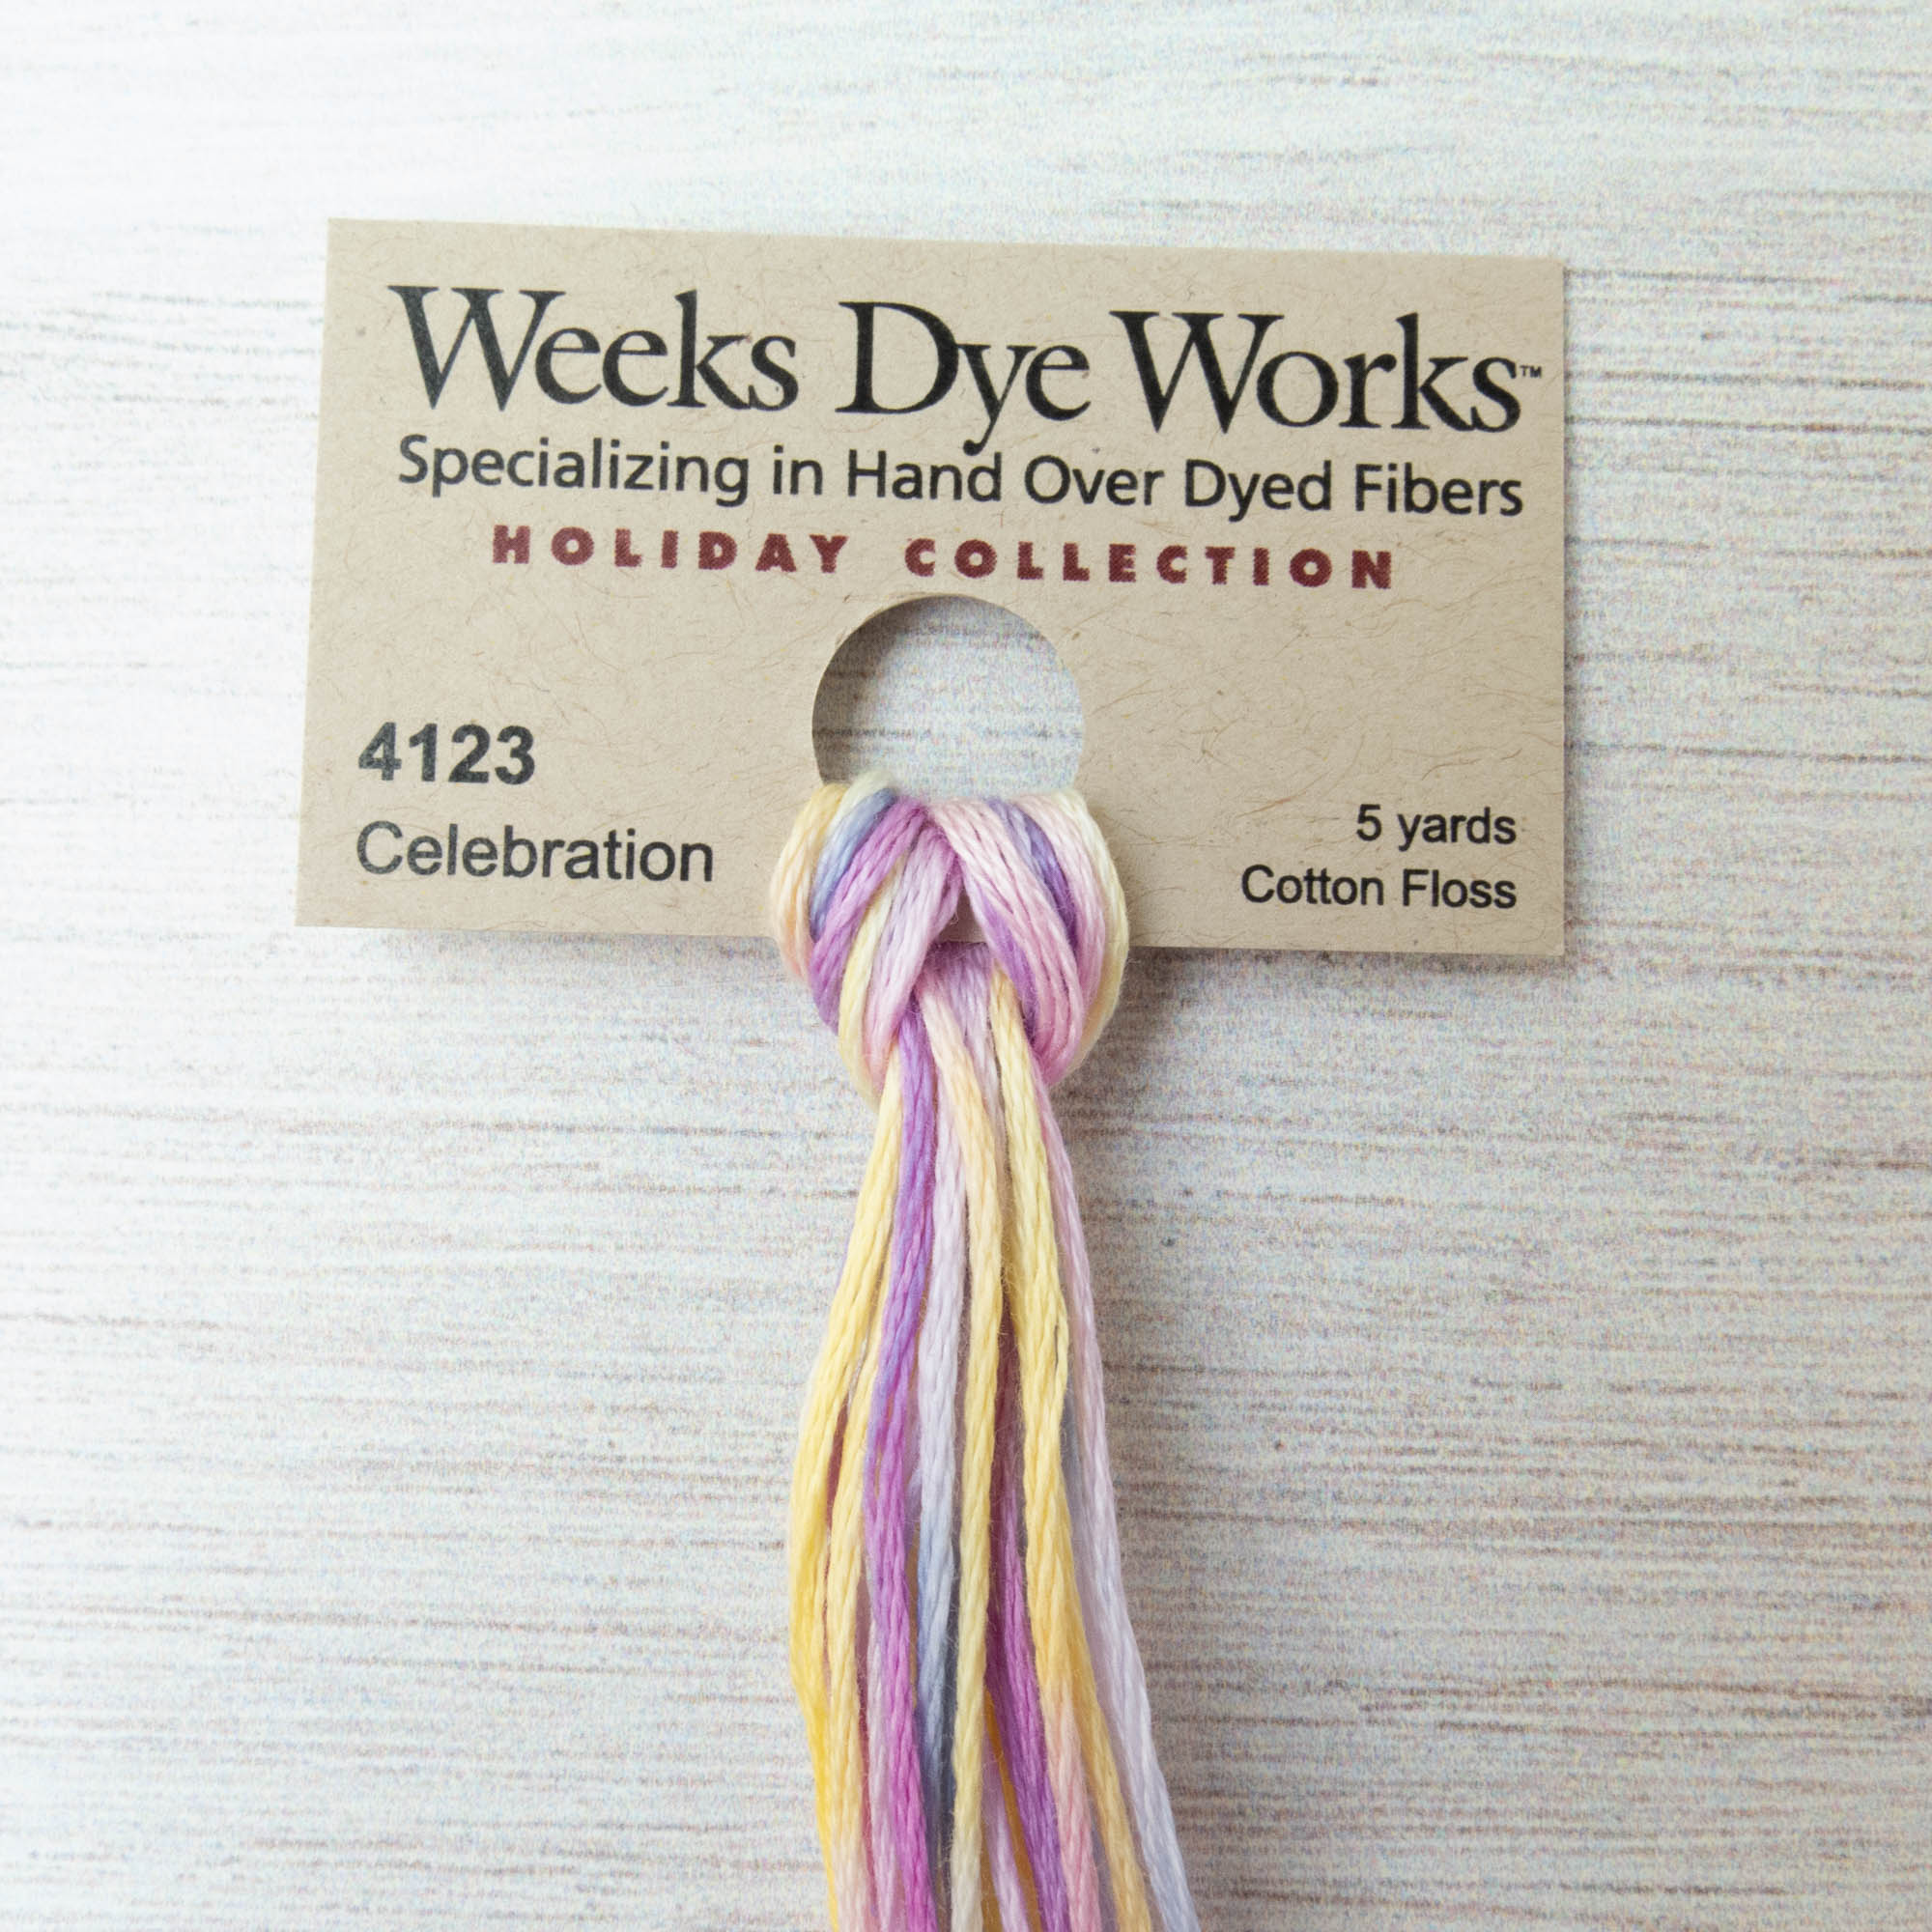 Weeks Dye Works Hand Over Dyed Embroidery Floss - Collards (1277